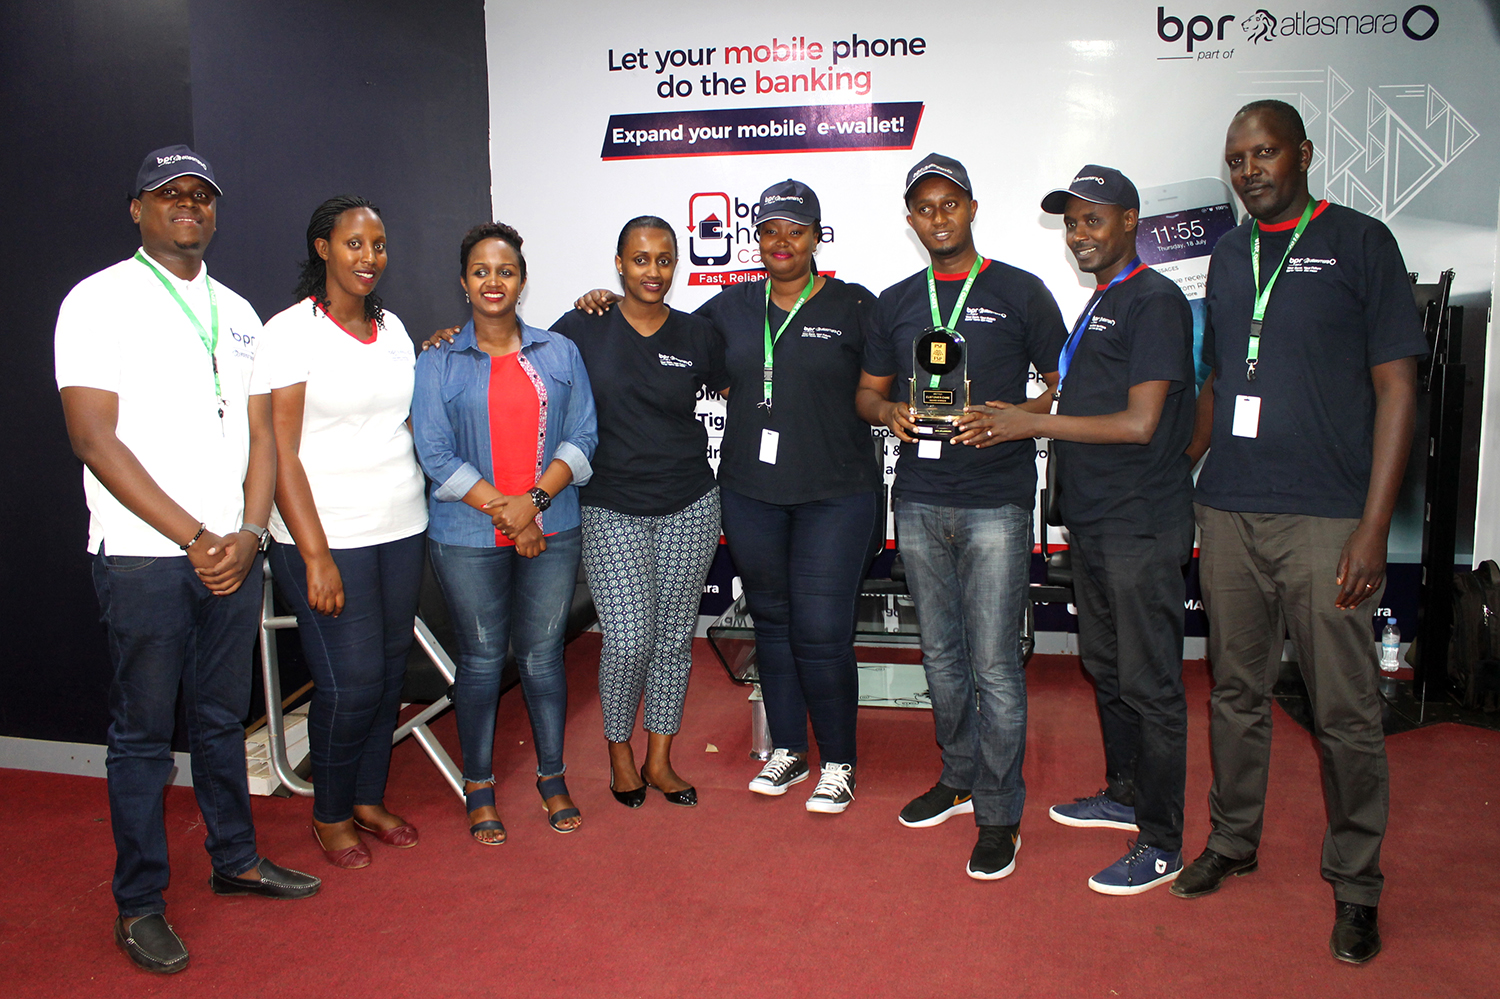 BPR employees take a group photo after the awarding ceremony yesterday. All photos by Joseph Mudingu.